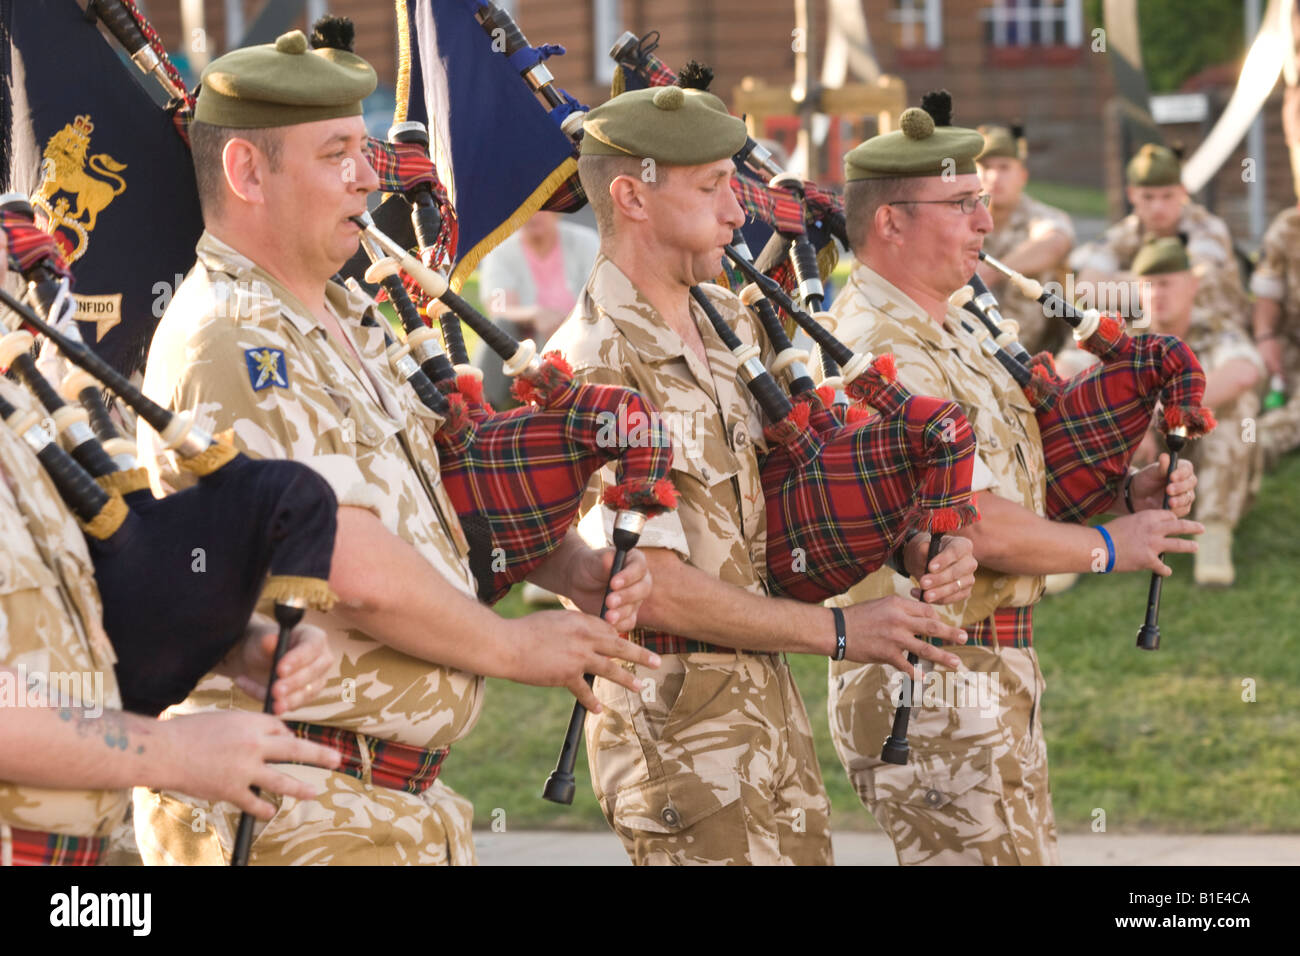 Scottish soldiers in military dress desert fatigues bagpipers beatiing the retreat Dumfries Scotland UK Stock Photo